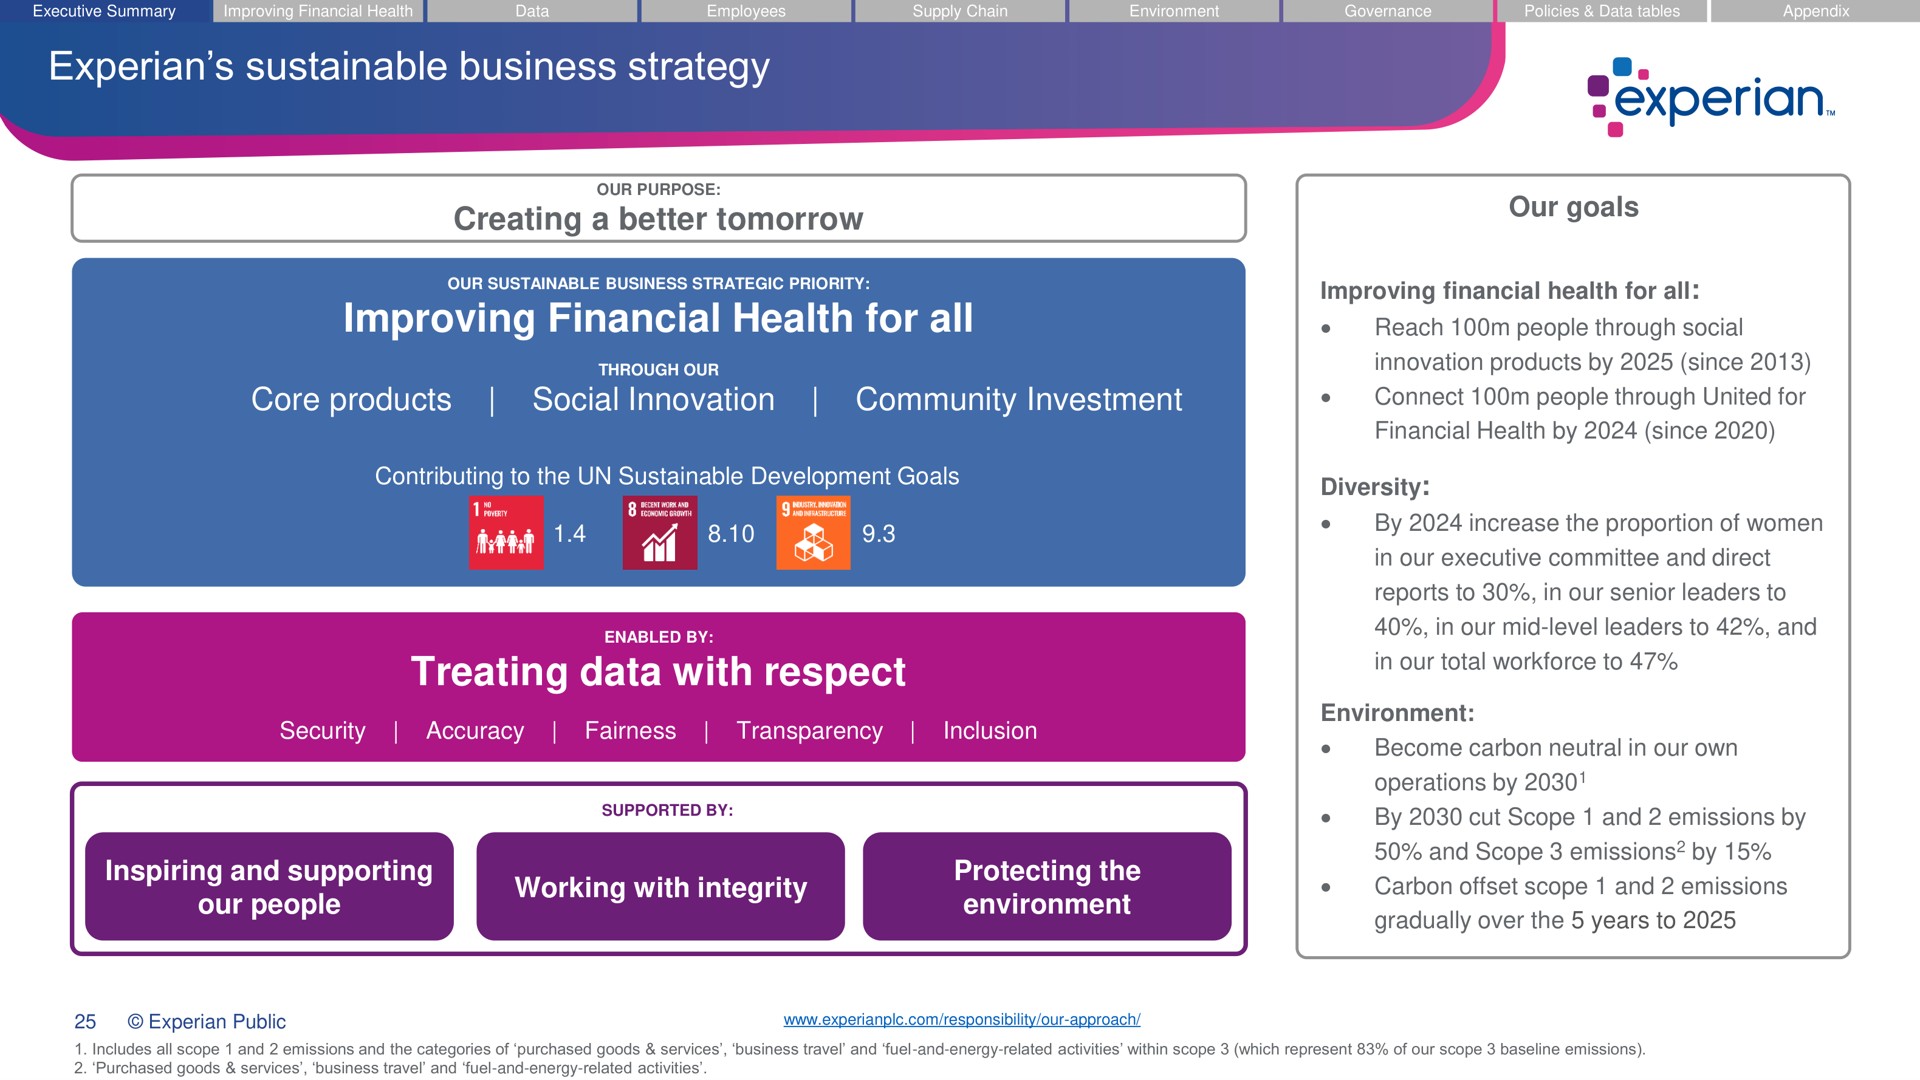 sustainable business strategy creating a better tomorrow improving financial health for all core products social innovation community investment treating data with respect | Experian